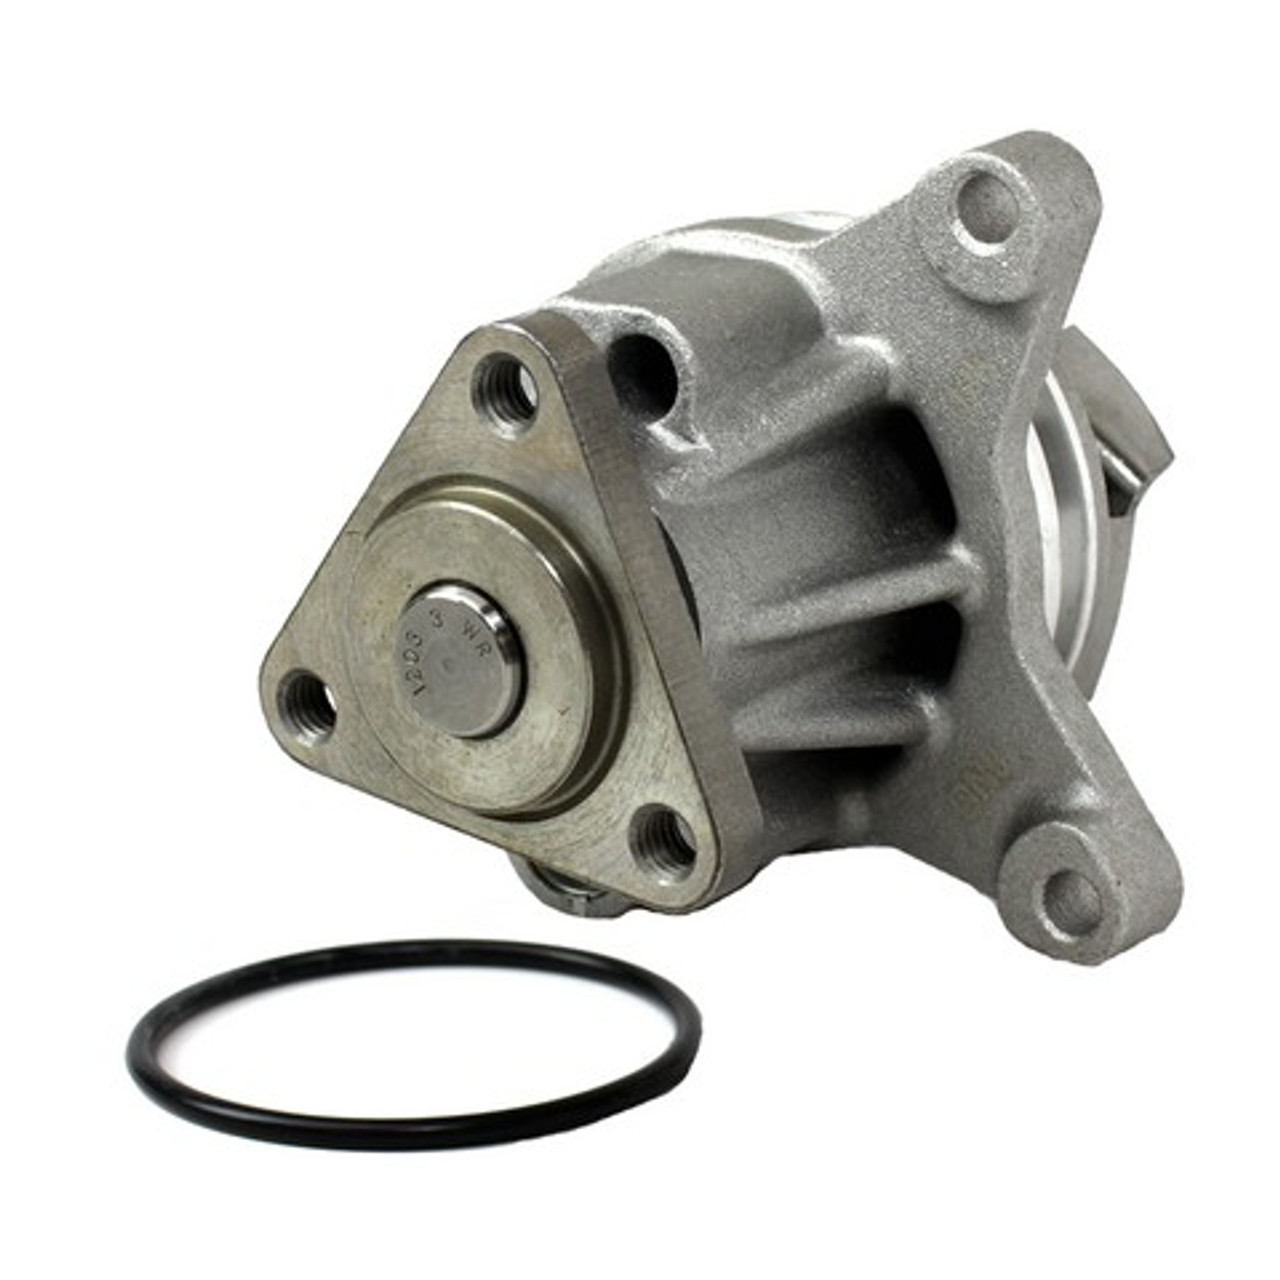 Water Pump 2.0L 2010 Ford Focus - WP4032.34